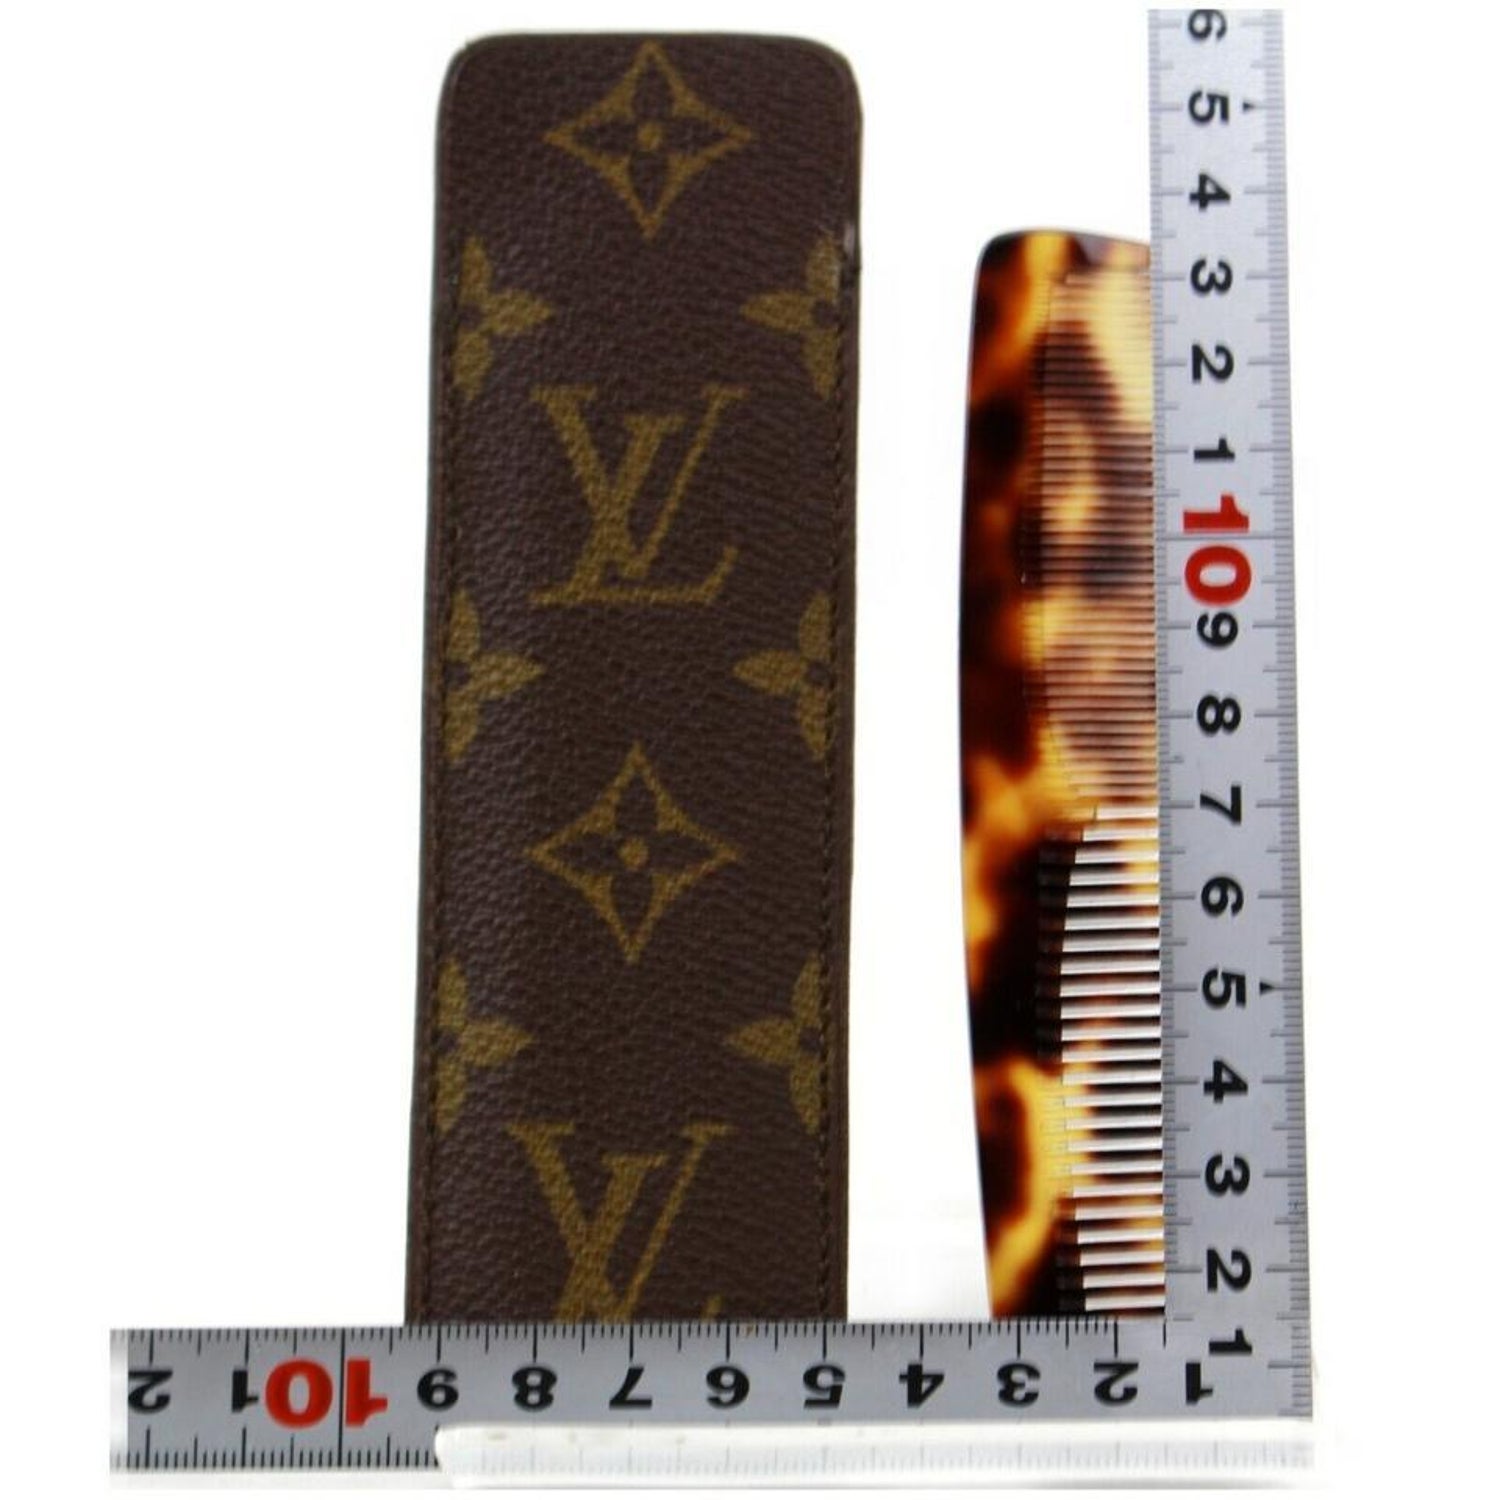 Louis Vuitton Hair Band - 5 For Sale on 1stDibs